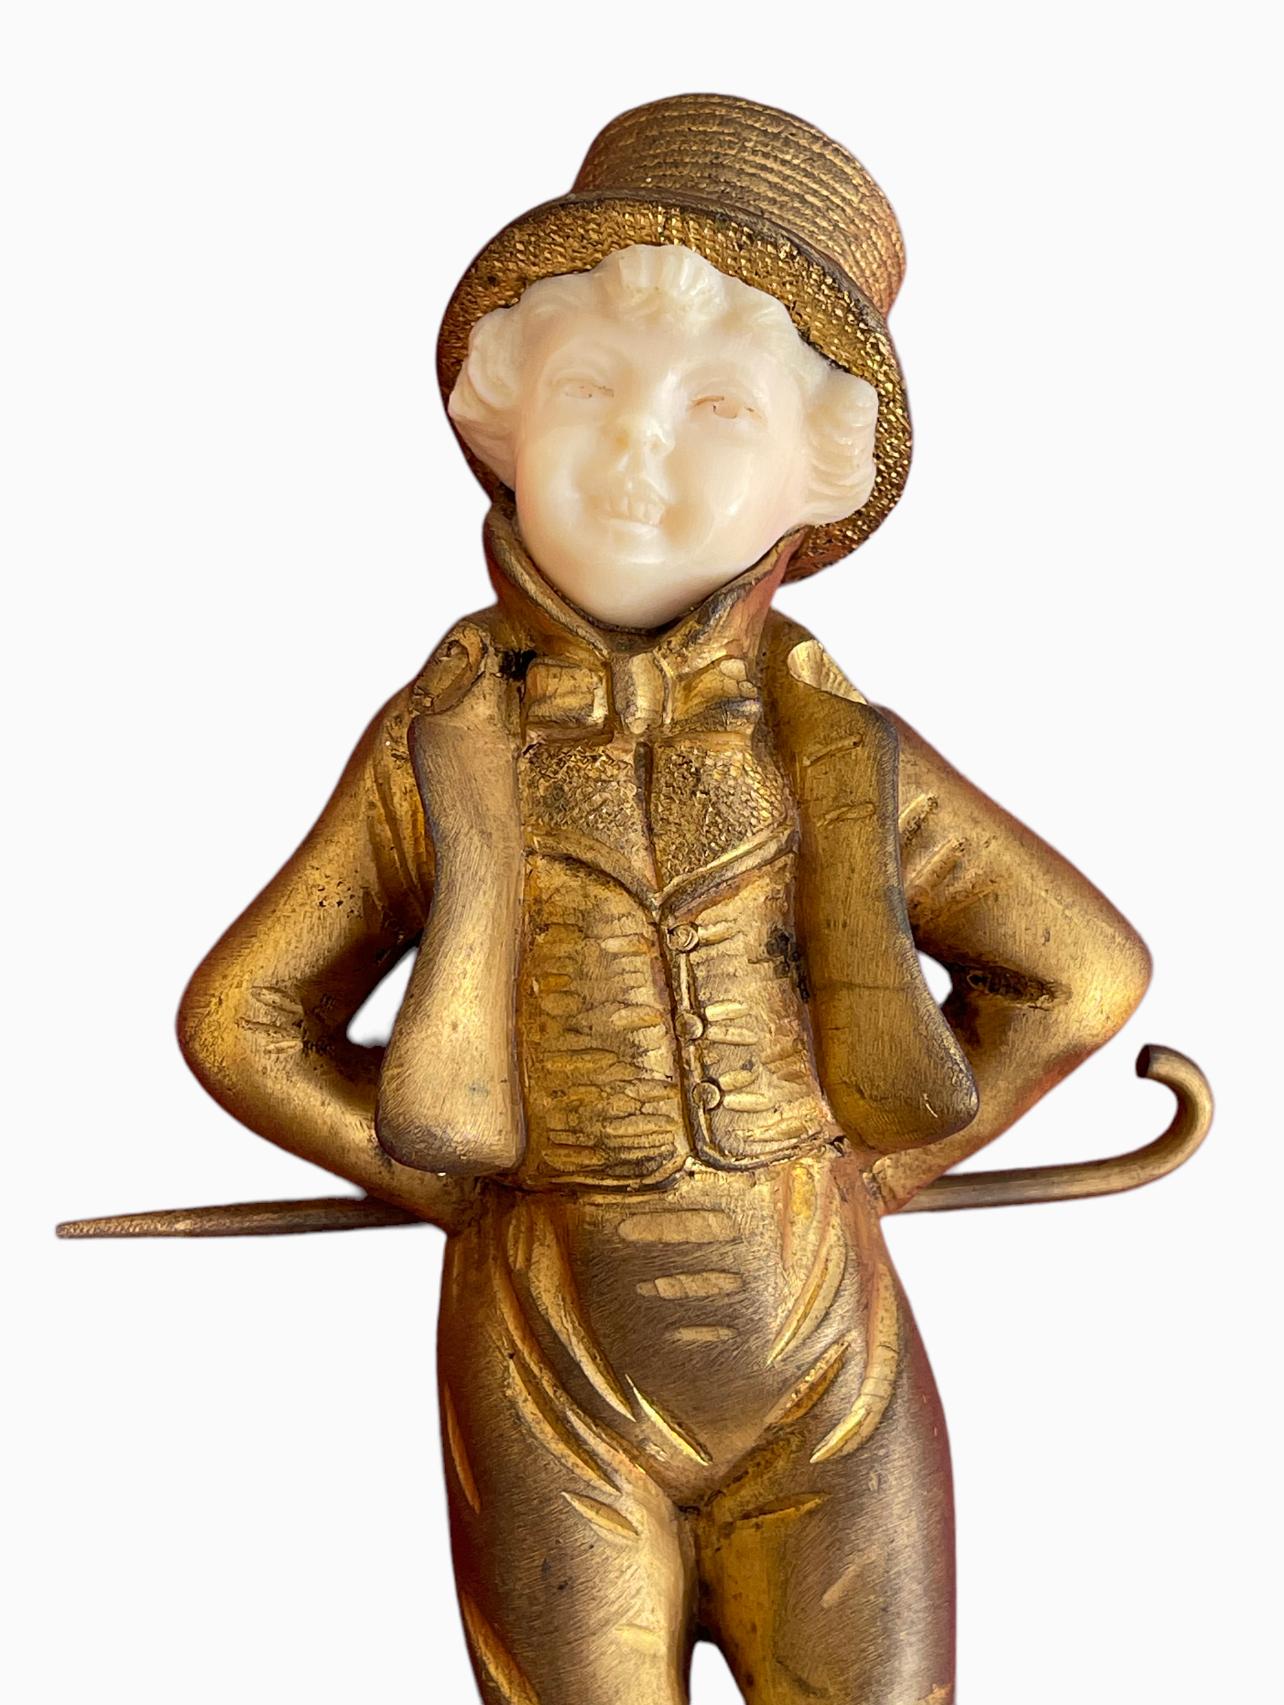 Chryselephantine representing a young man dressed in a top hat, his hands behind his back holding a walking stick. Circa 1910. This bronze is signed 